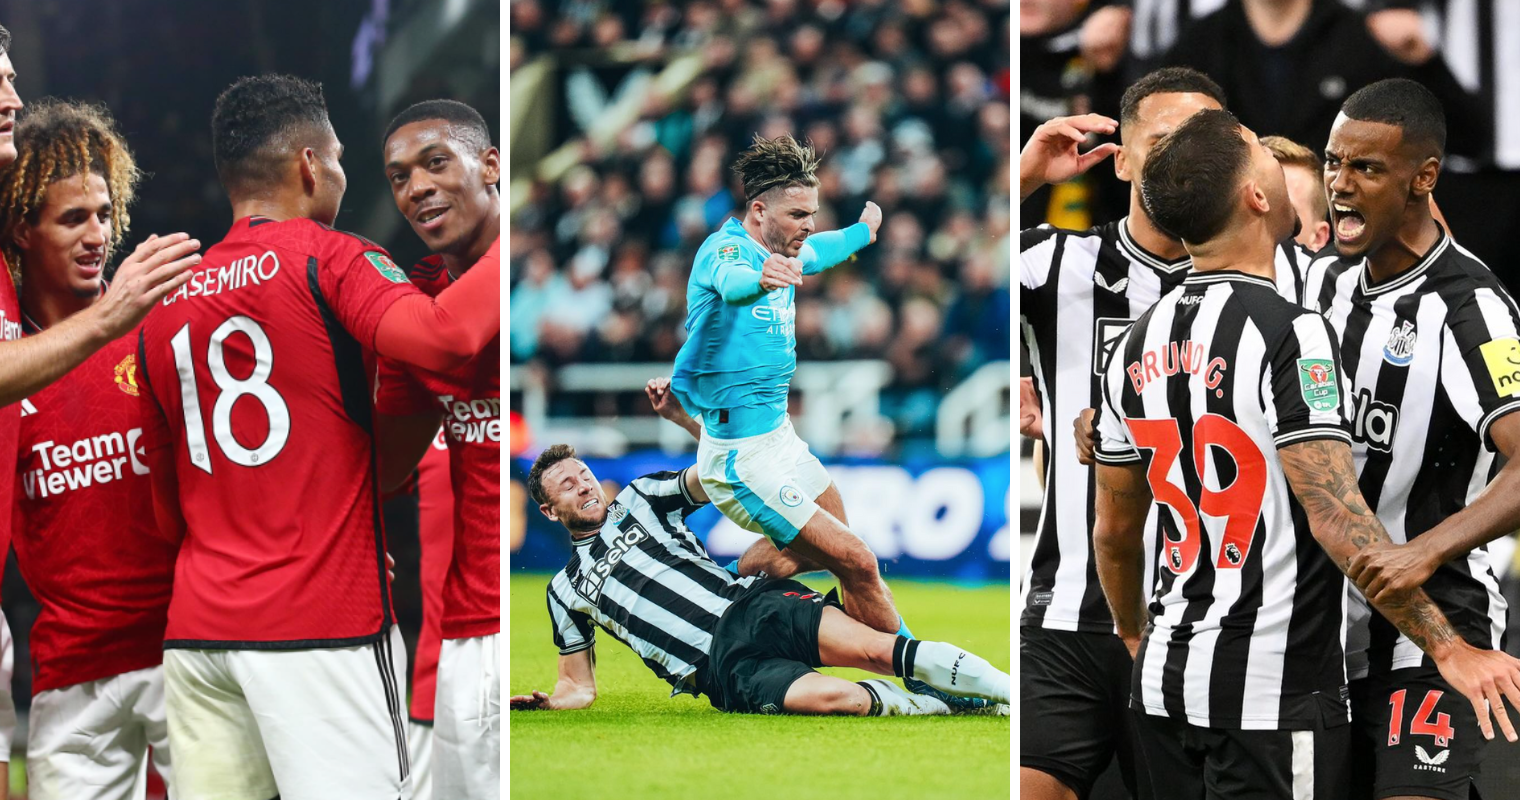 Newcastle United knock Man City out of the Carabao Cup